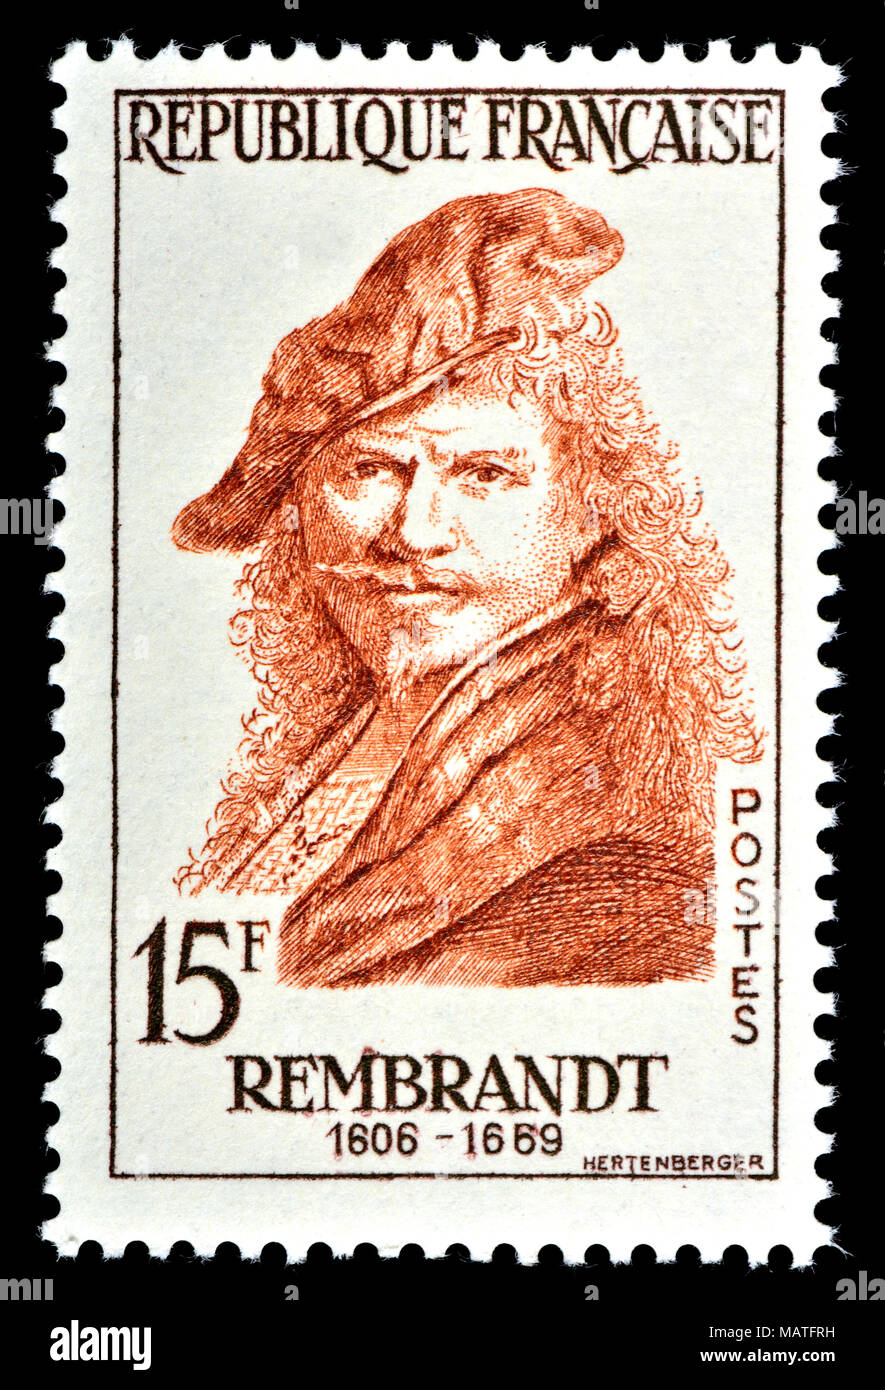 French postage stamp (1957) : Rembrandt Harmenszoon van Rijn (1606 - 1669) Dutch draughtsman, painter, and printmaker. Stock Photo